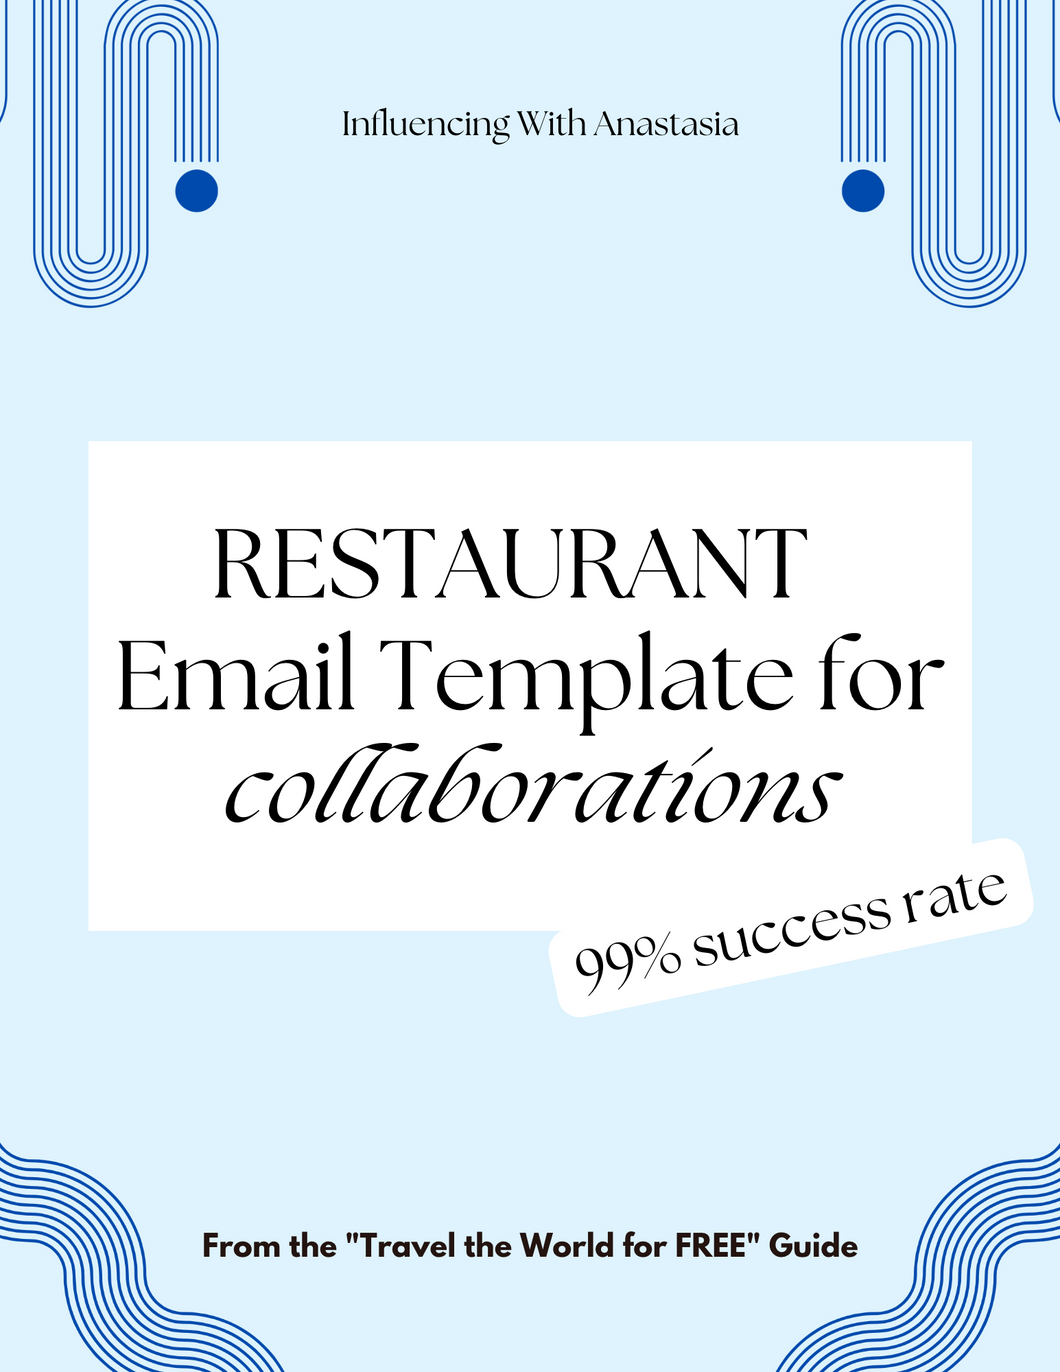 Restaurant Collaborations (Email Templates)